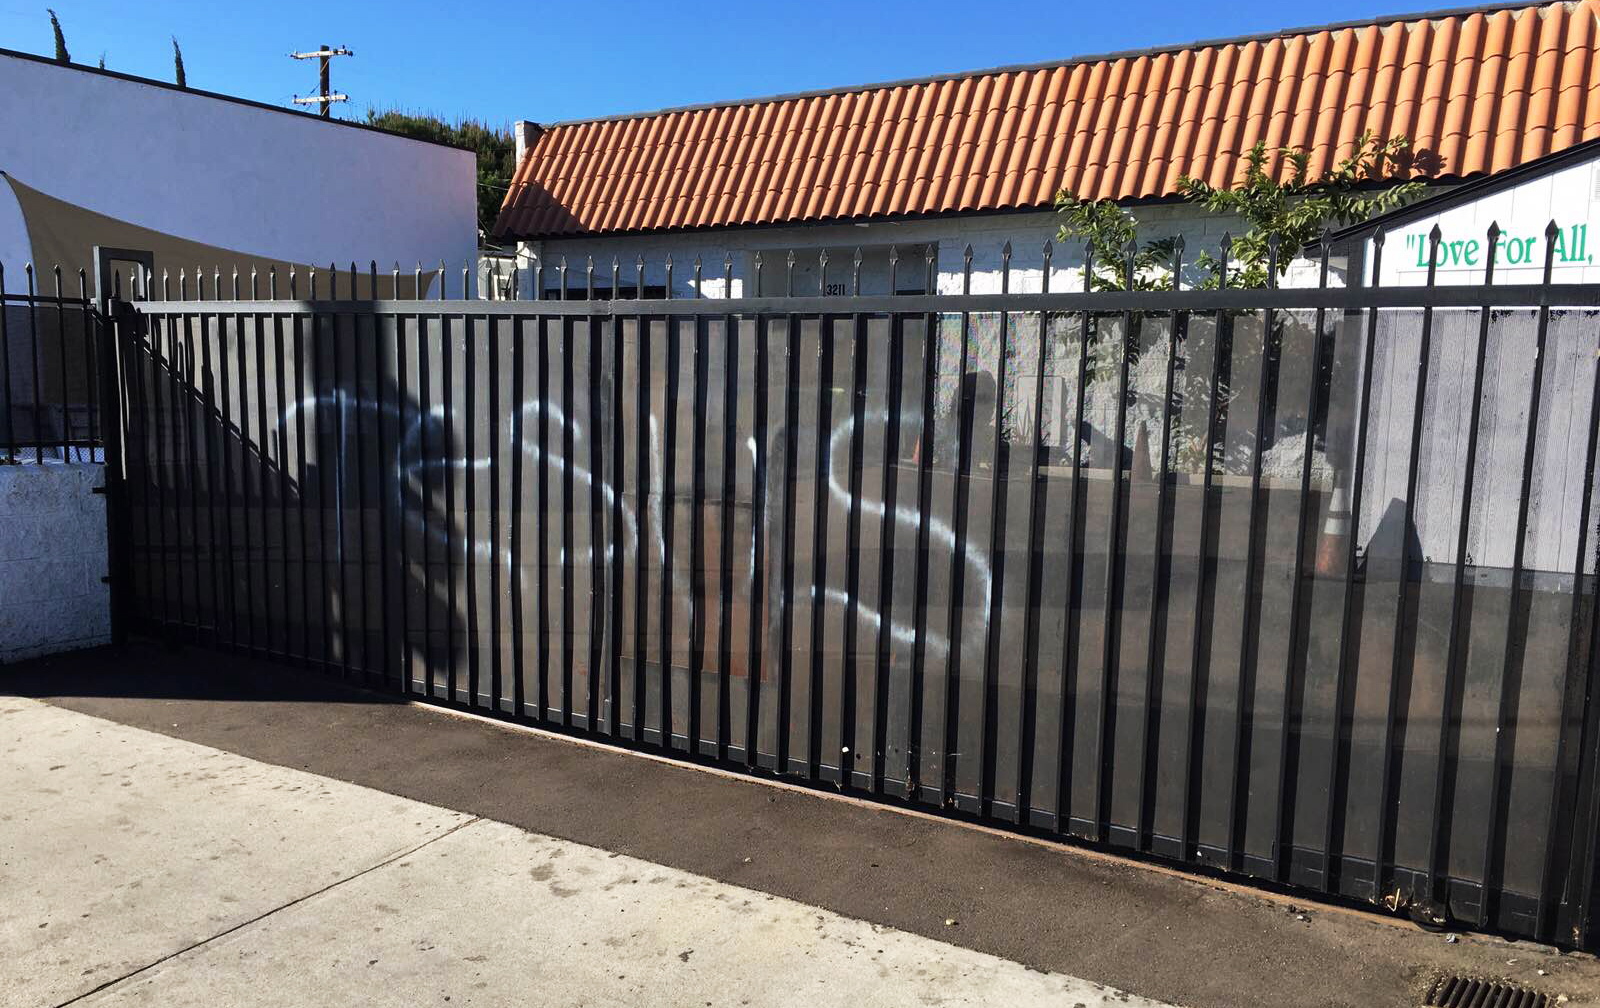 &quot;Jesus&quot; spelled out in spray paint is seen on a gate Sunday at the Ahmadiyya Muslim Community Baitus-Salaam Mosque in Hawthorne, Calif. The FBI is investigating after police there said two mosques were vandalized with paint and a fake grenade was left in the driveway of one of the properties.